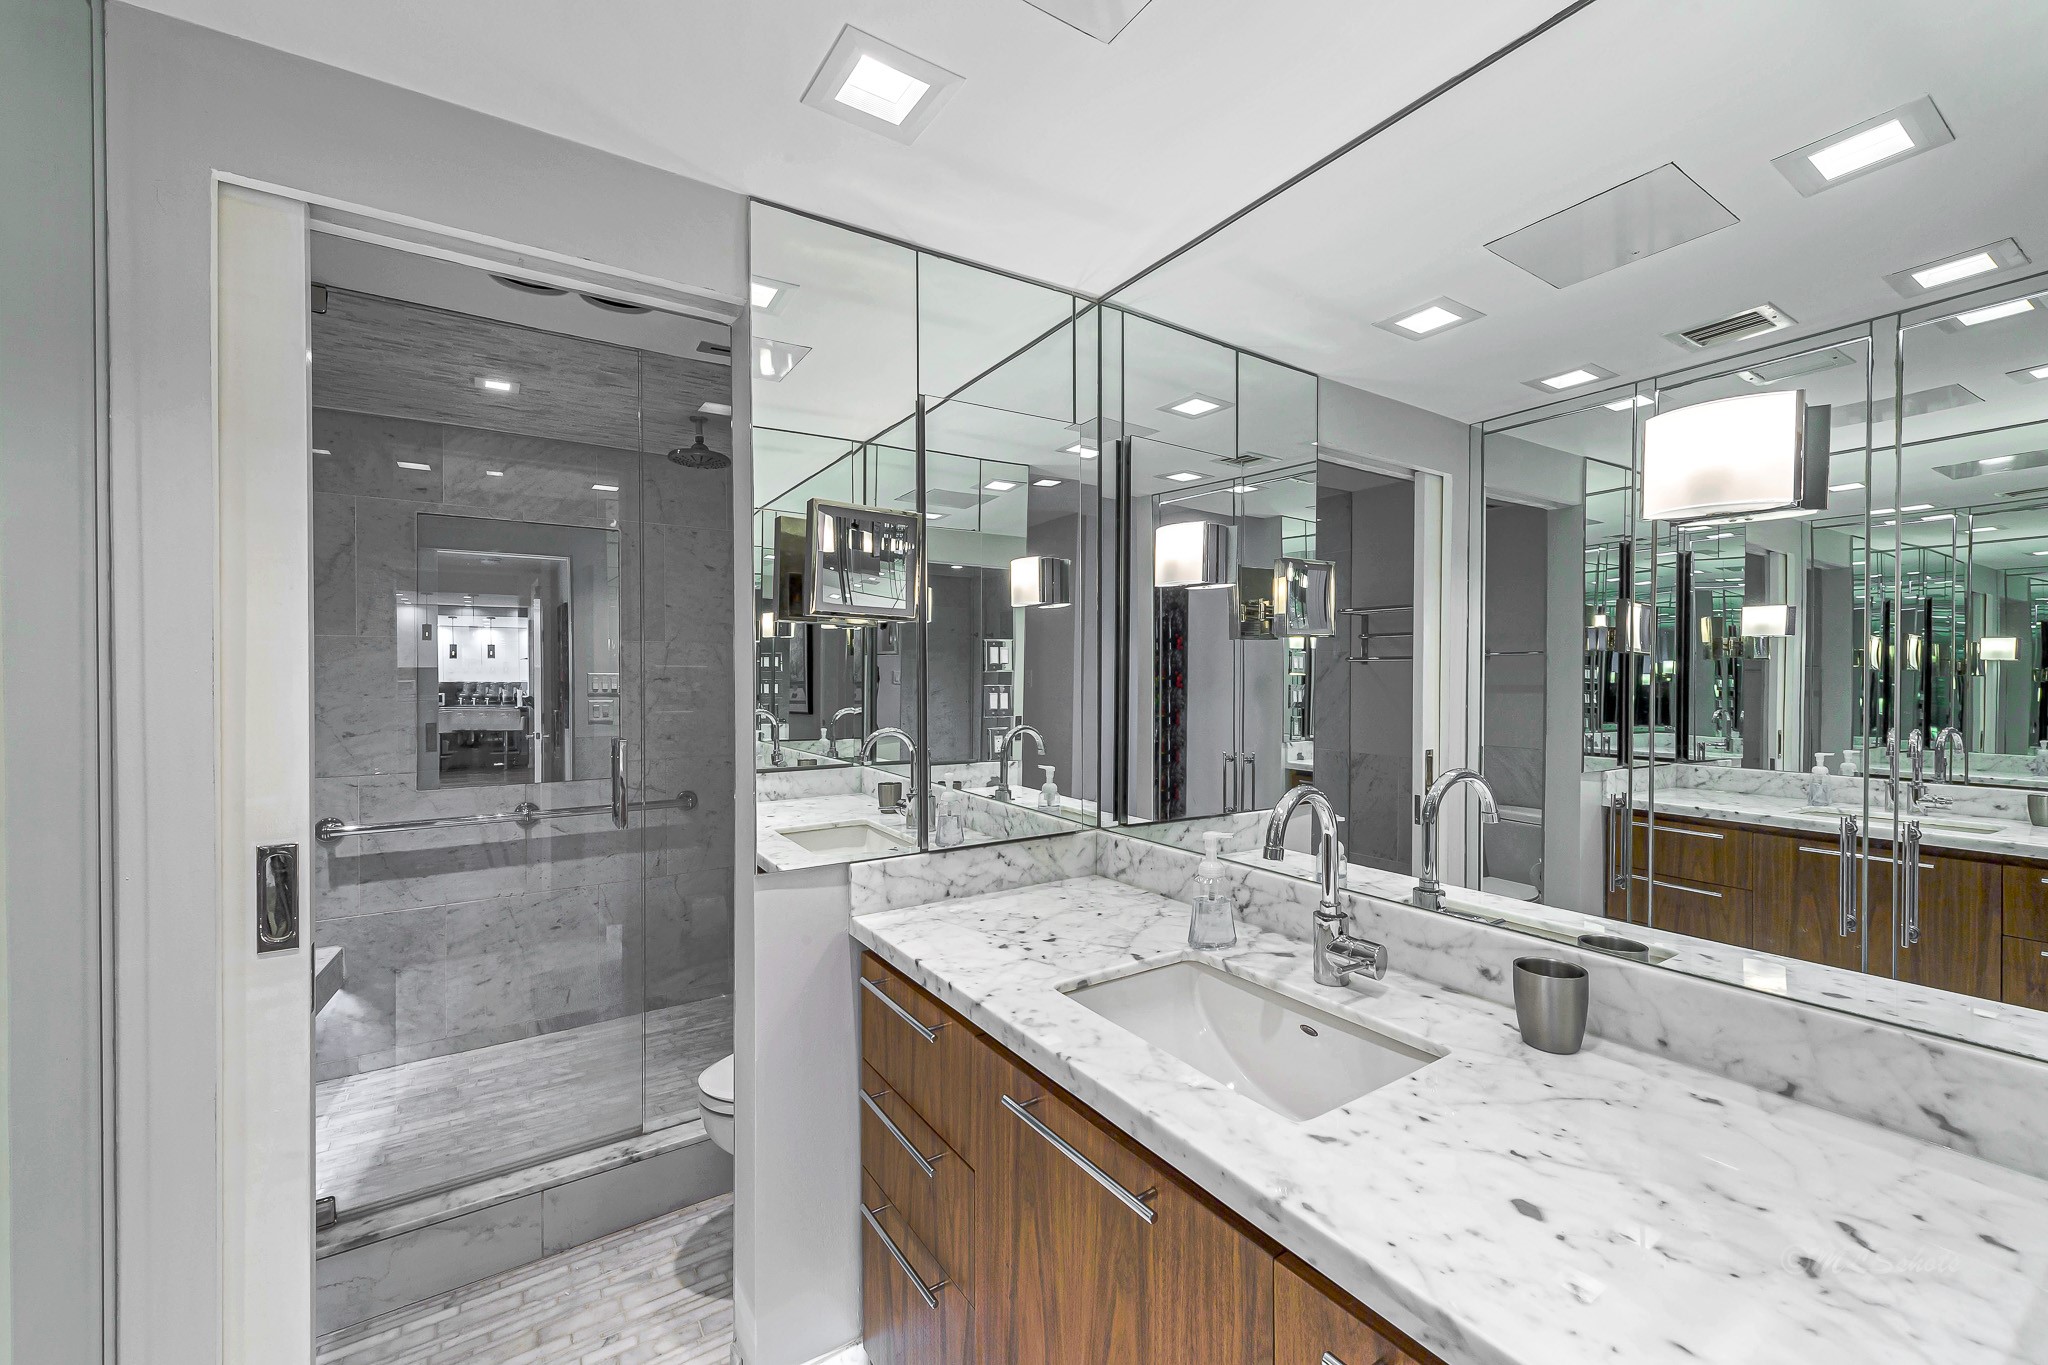 Luxurious primary bath with recessed lighting